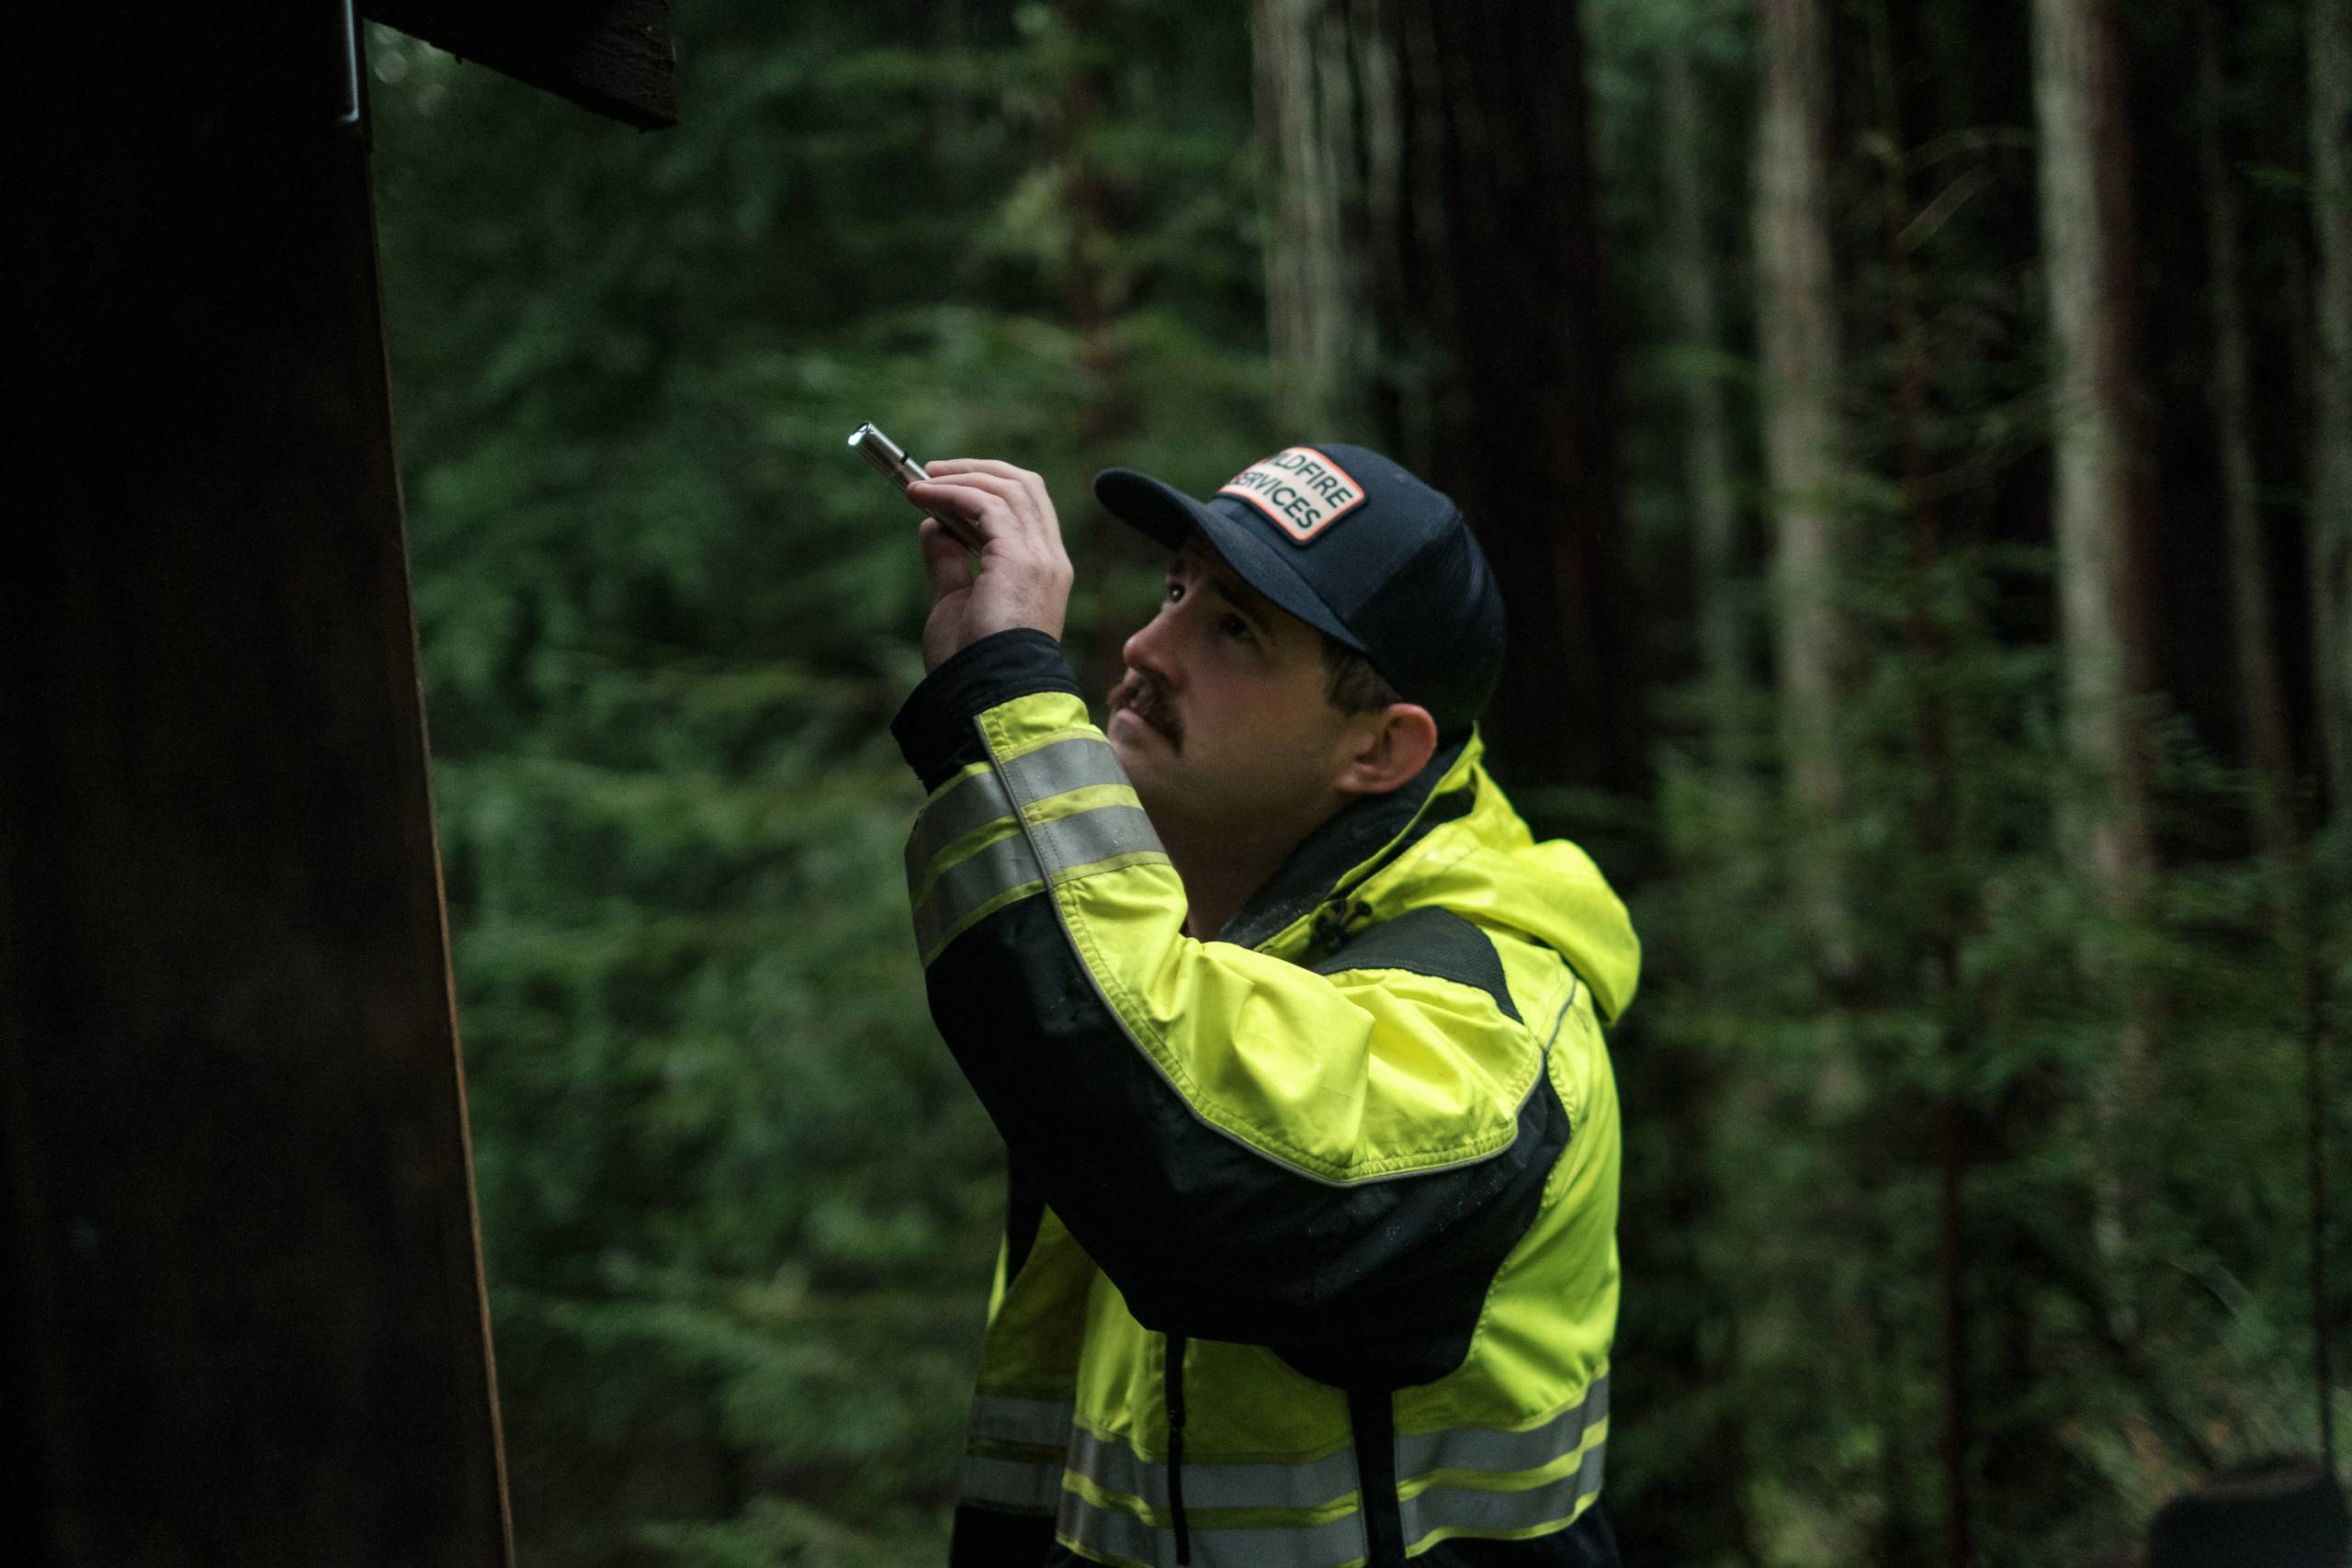 A man with a cap and a fluorescent yellow and black rain jacket points a flashlight during an inspection with trees in the background.